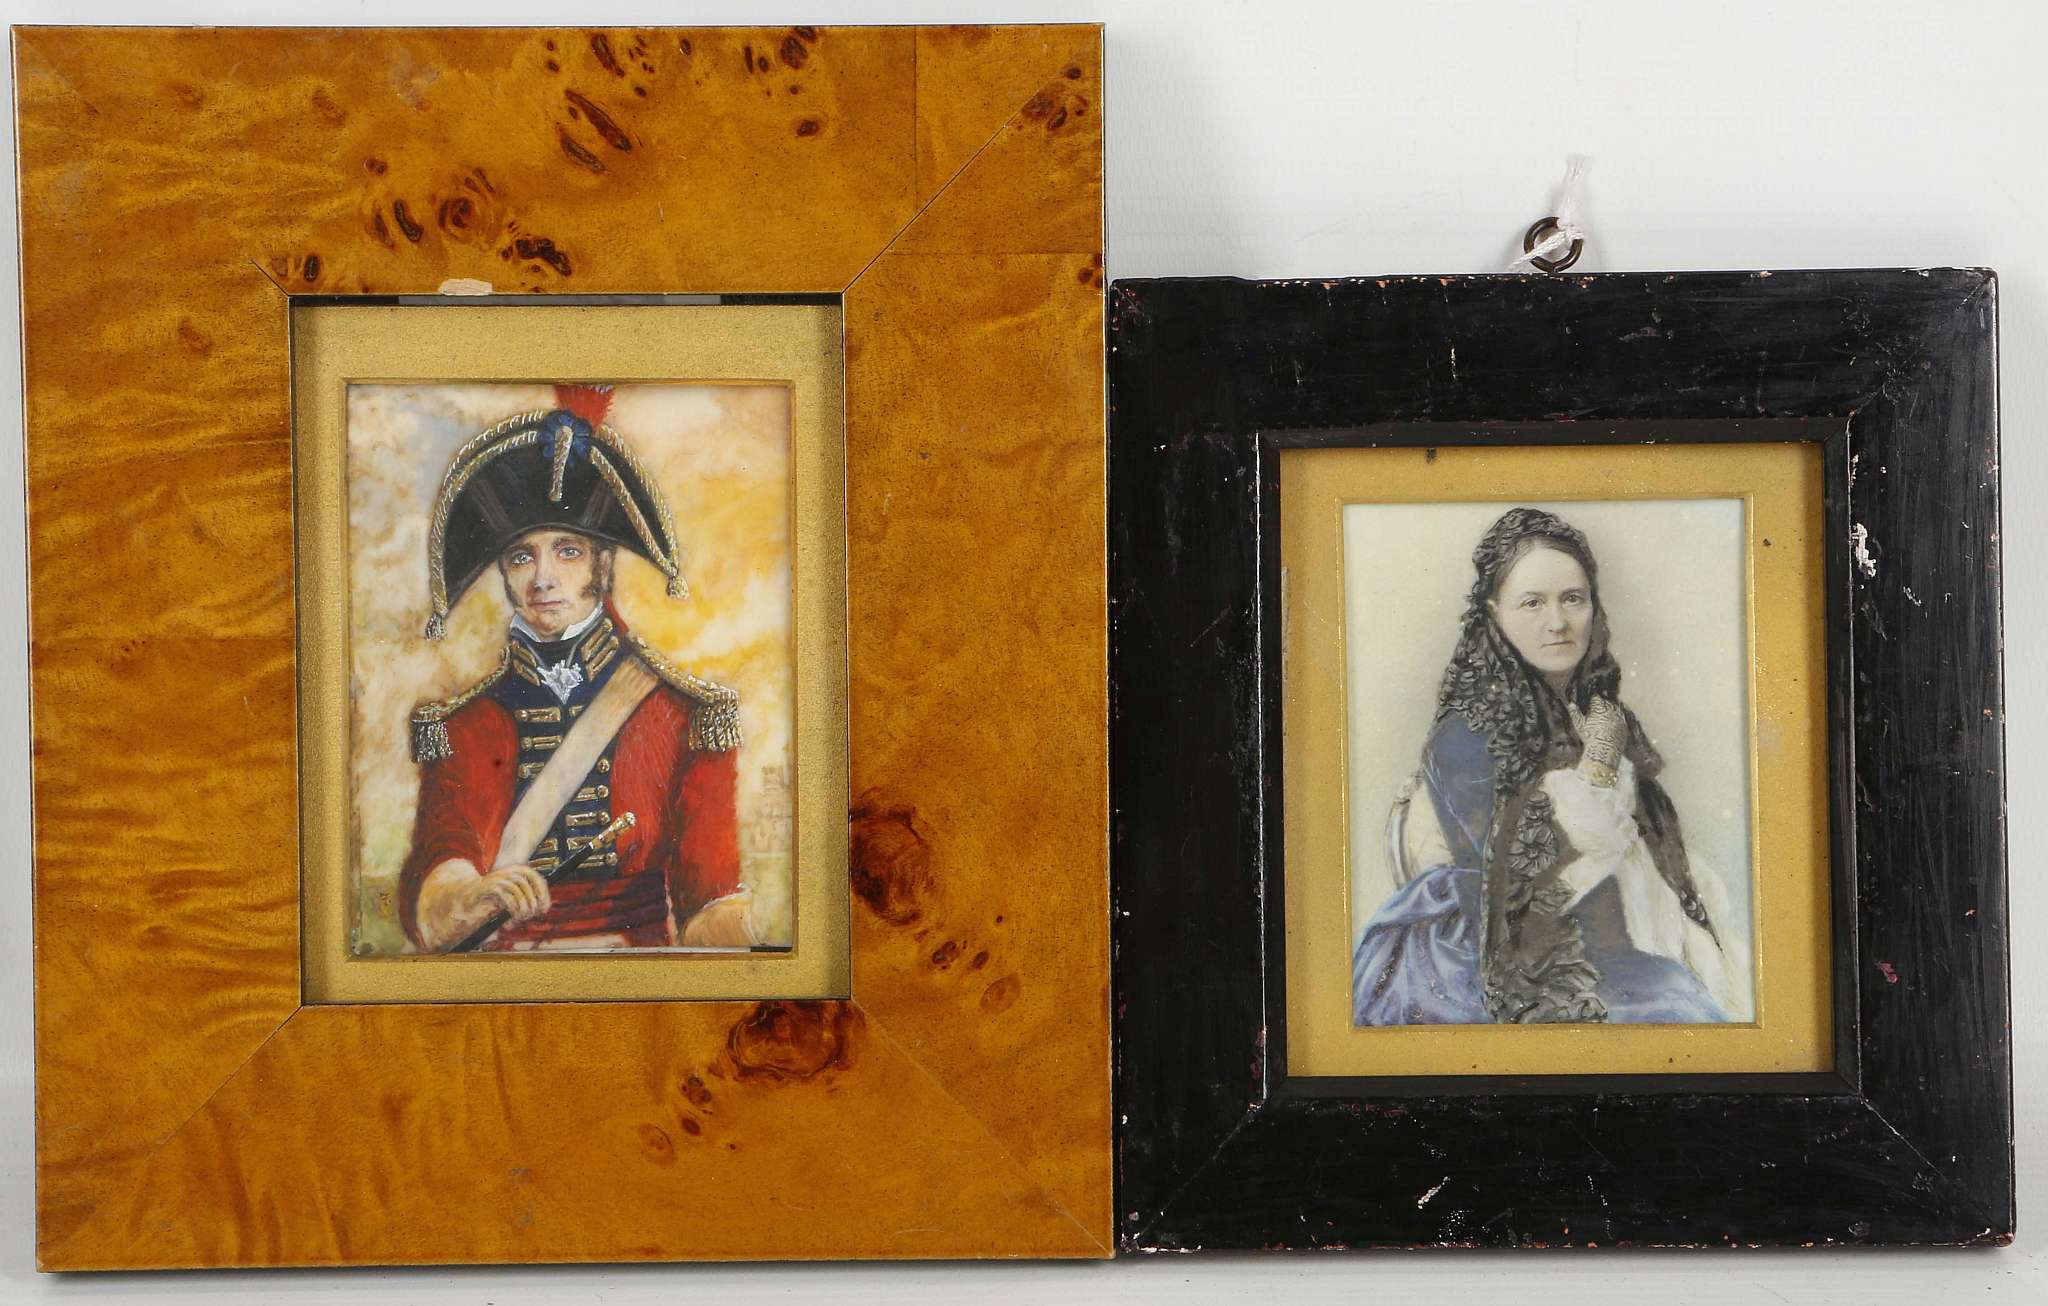 A mounted portrait miniature of a lady in blue and black dress, with another of a military